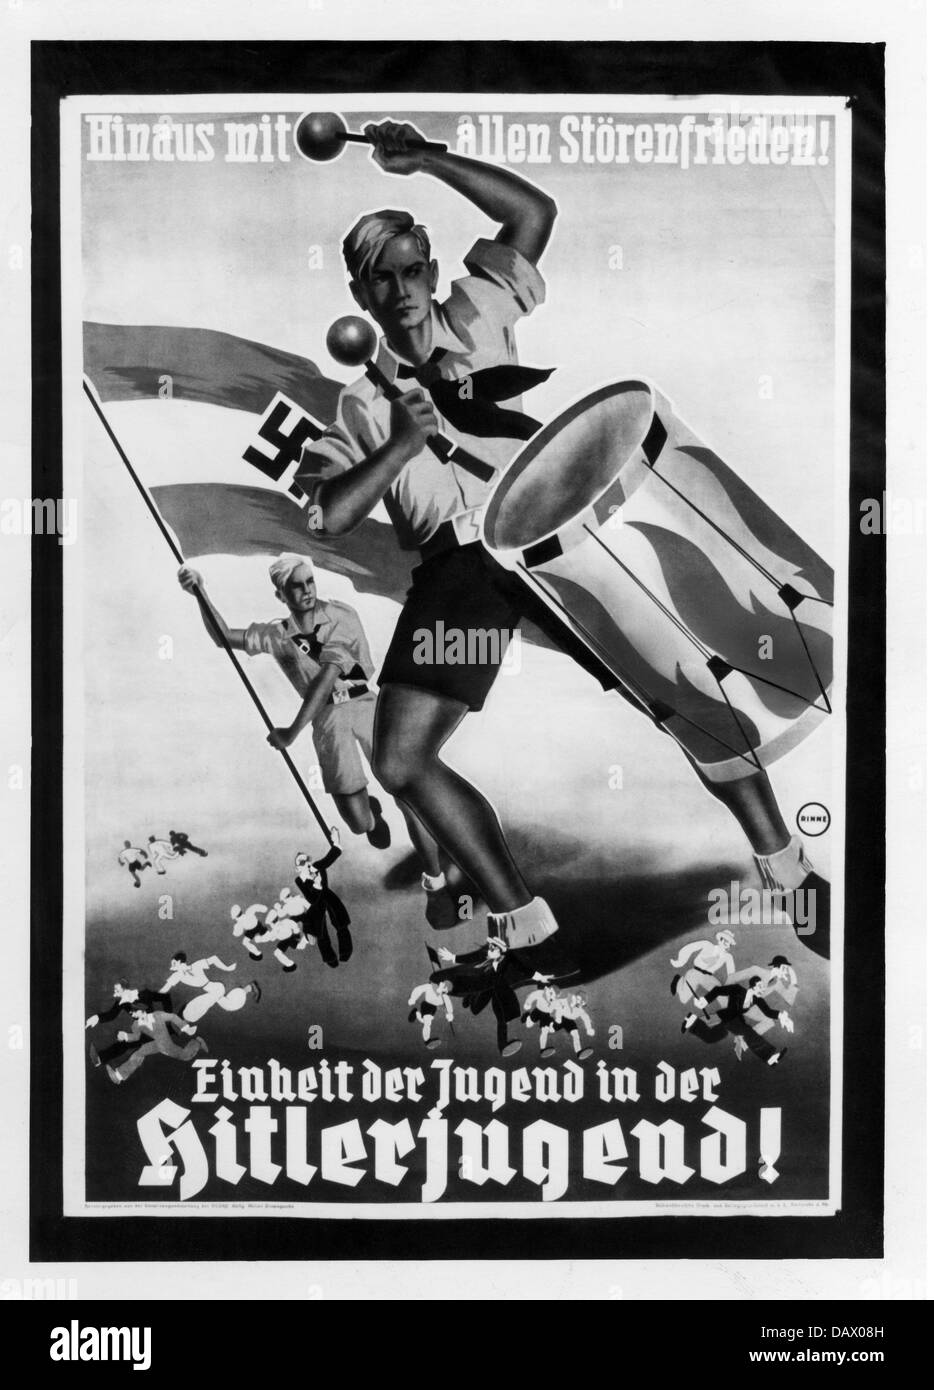 Nazism / National Socialism, organization, Hitler Youth (HJ), poster, 'All troublemakers out! Youth united in the Hitler Youth!', circa 1930s, Additional-Rights-Clearences-Not Available Stock Photo